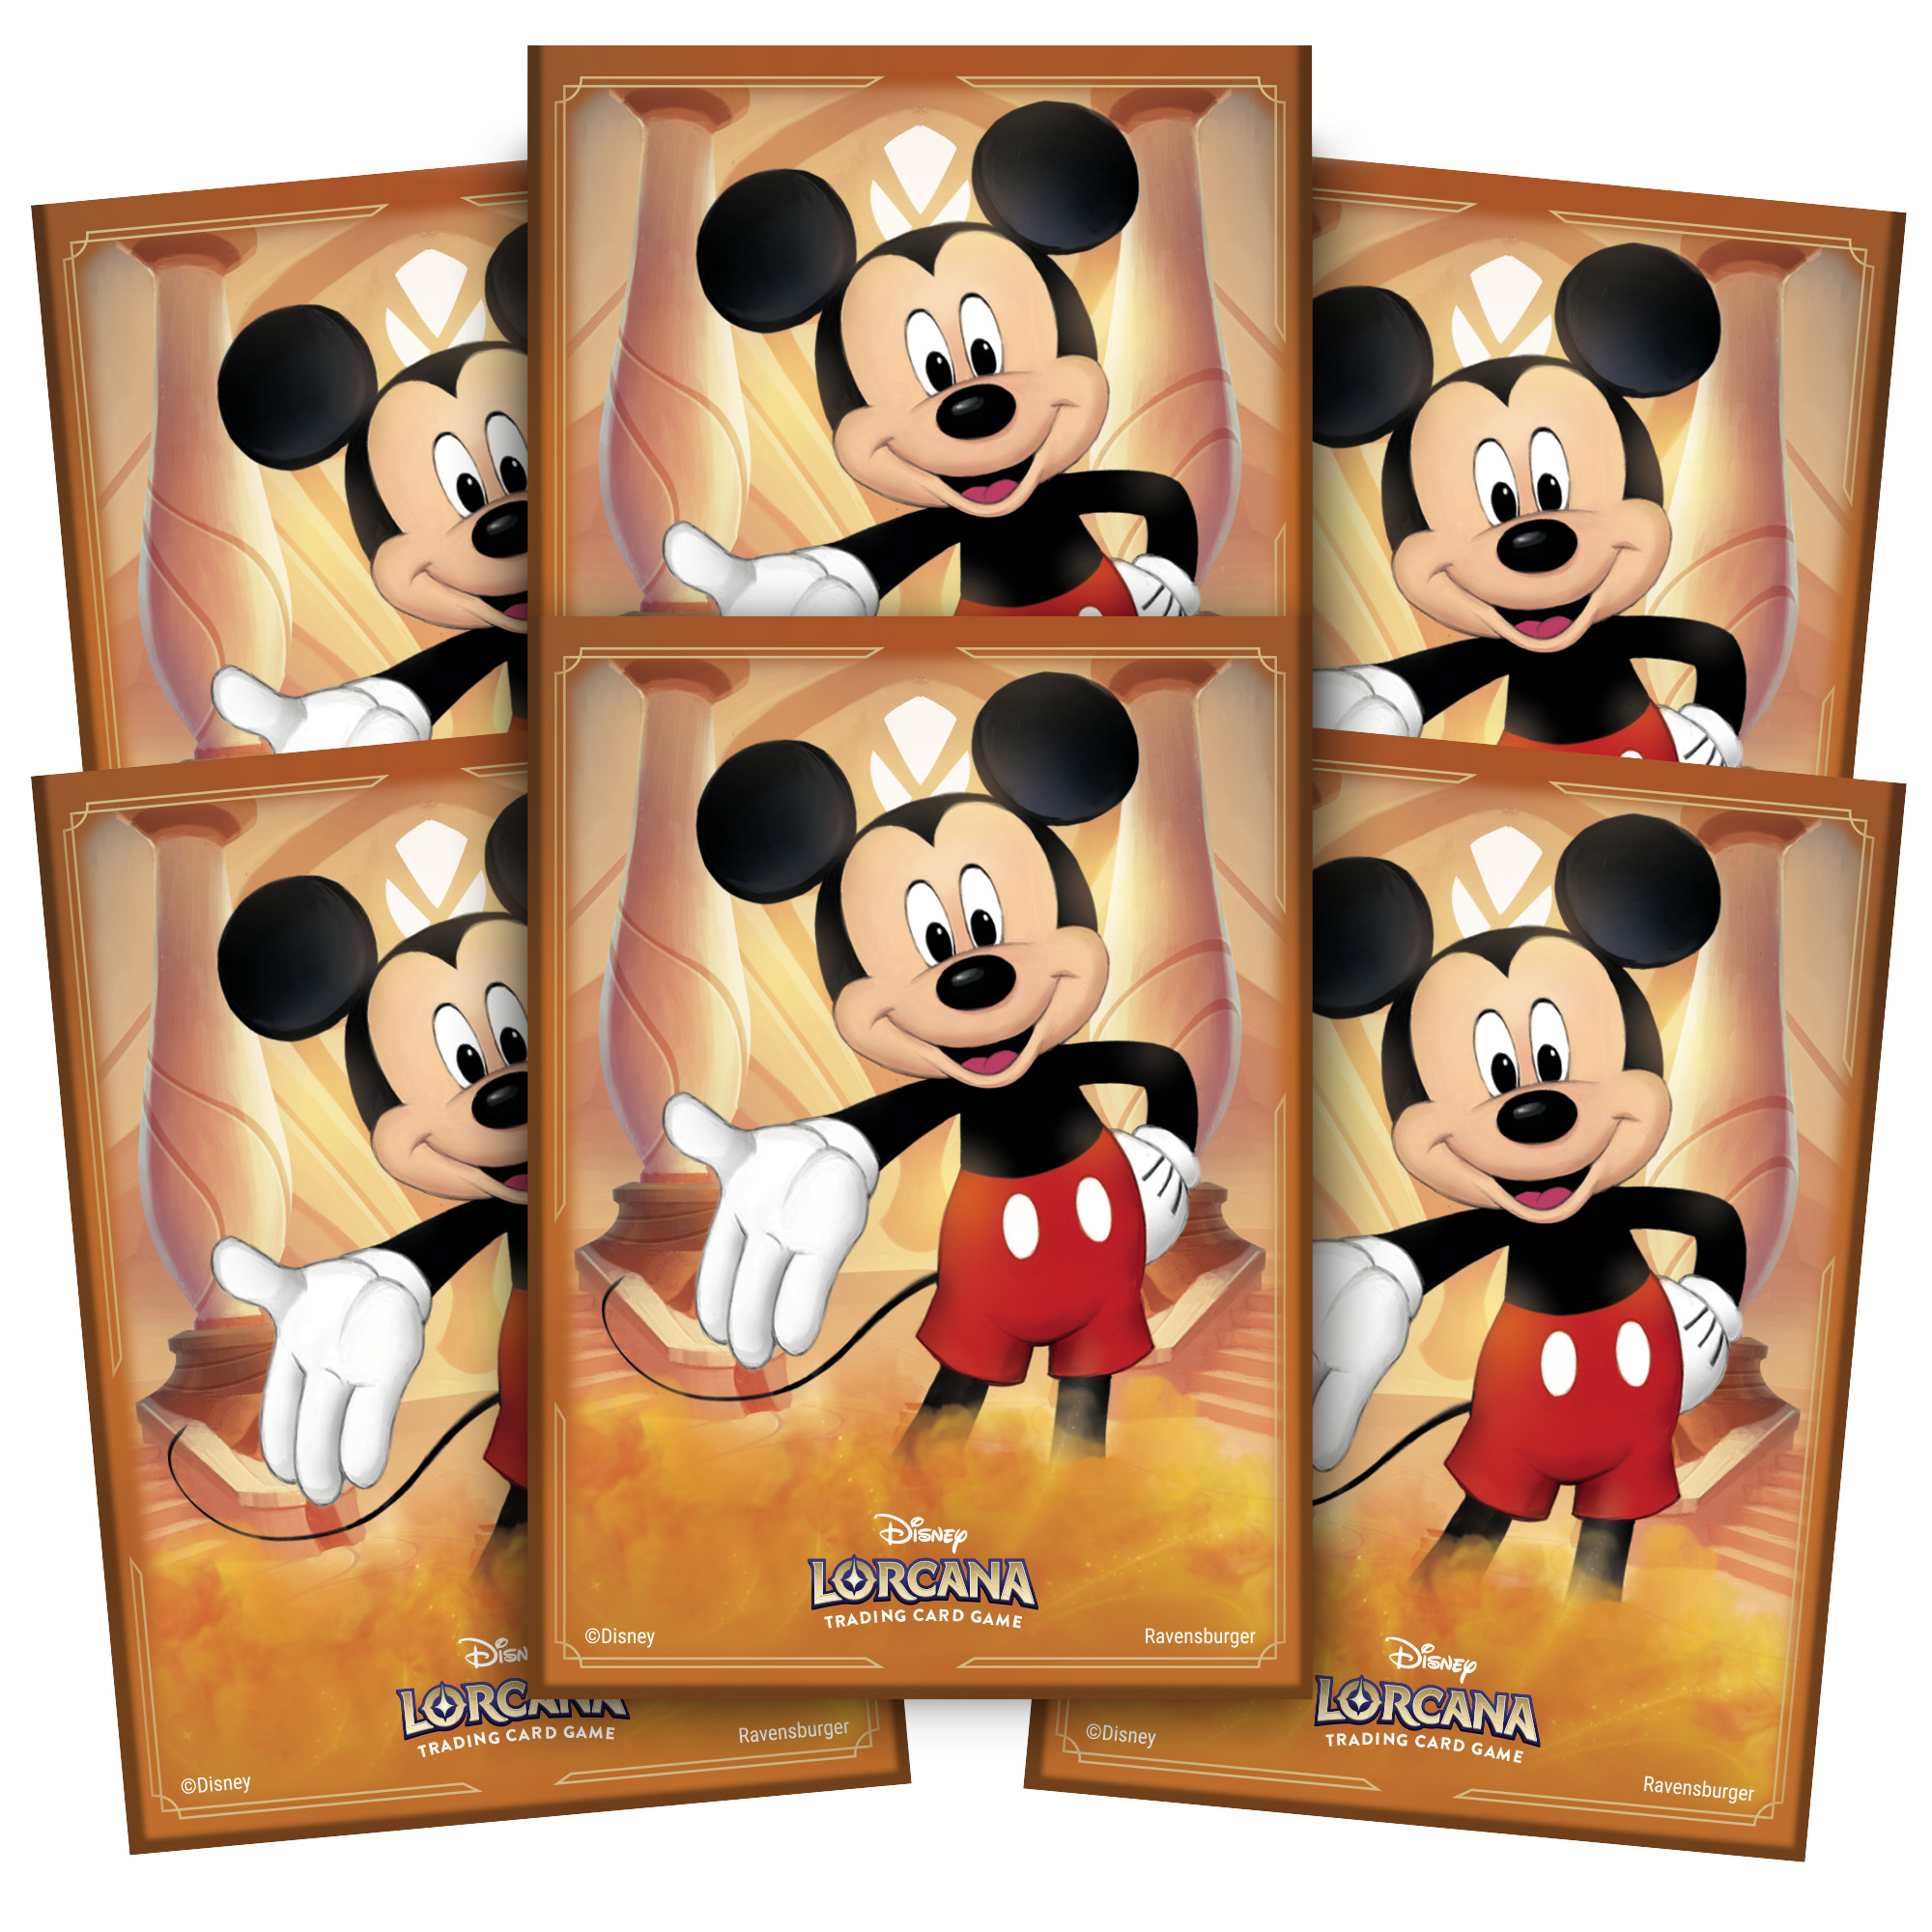 Firestorm Cards. Set 1 - Mickey Mouse Card Sleeves (65 Sleeves